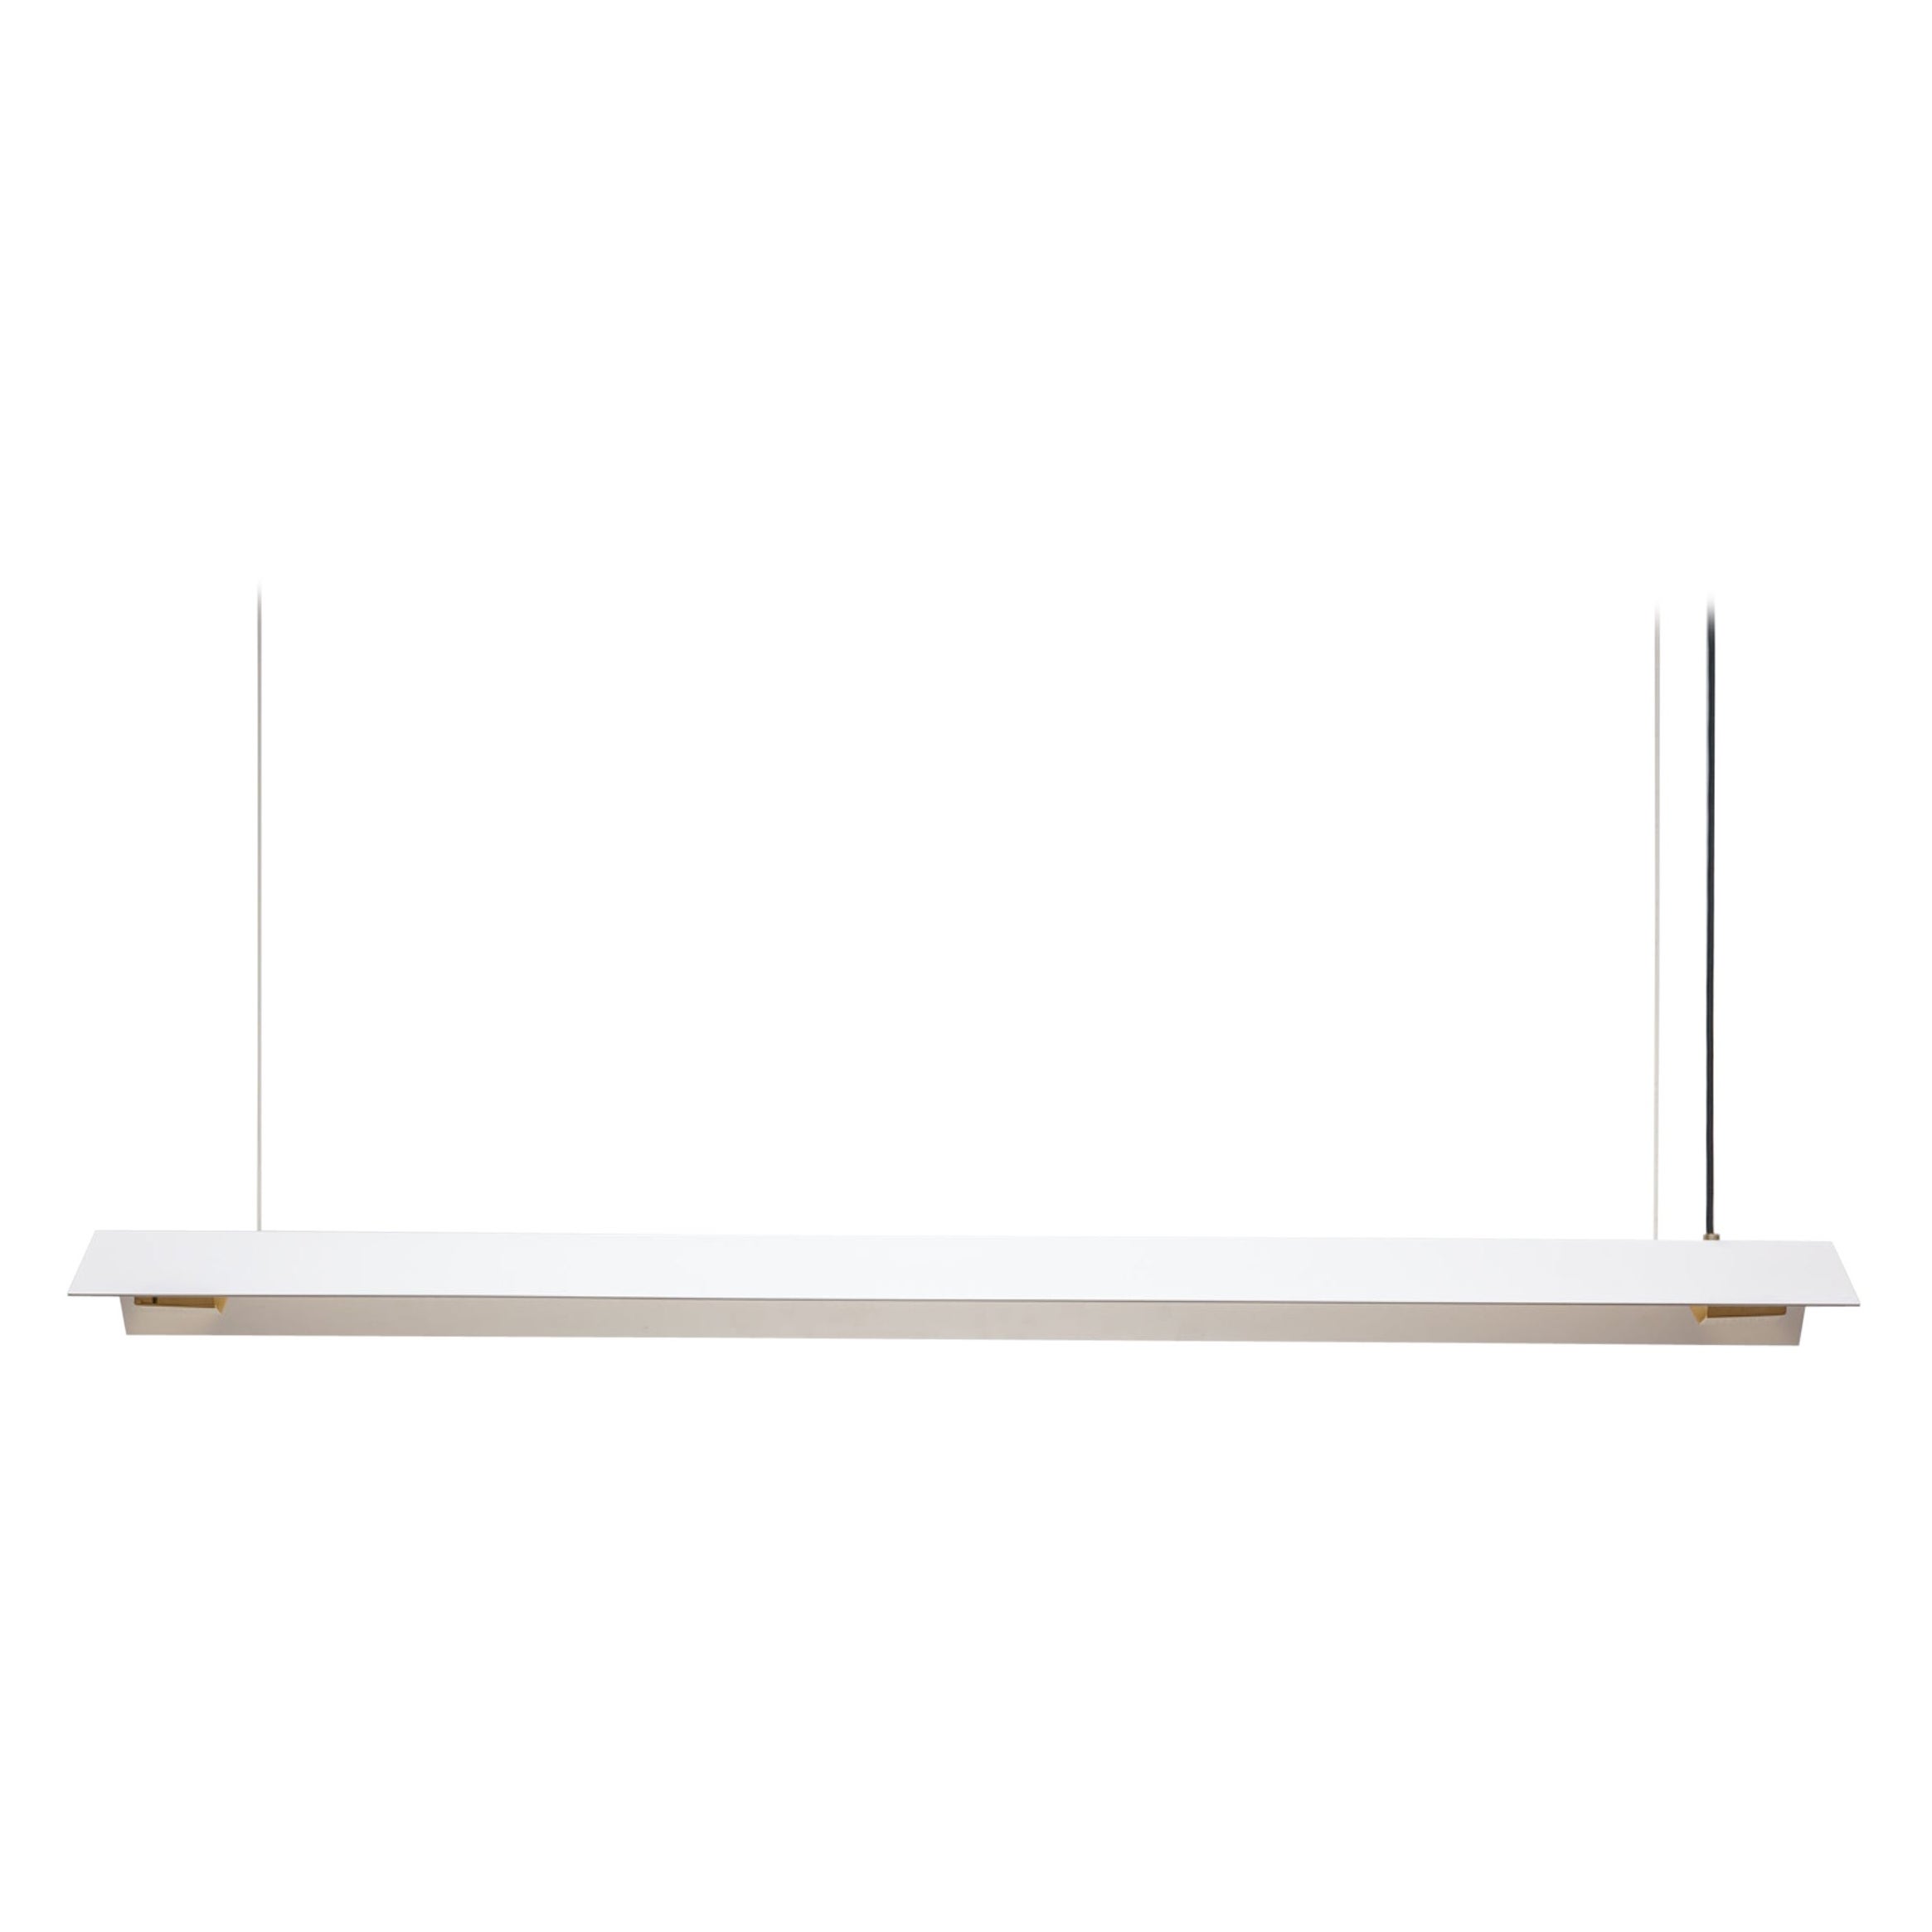 Large Misalliance Ex Pure White Suspended Light by Lexavala For Sale